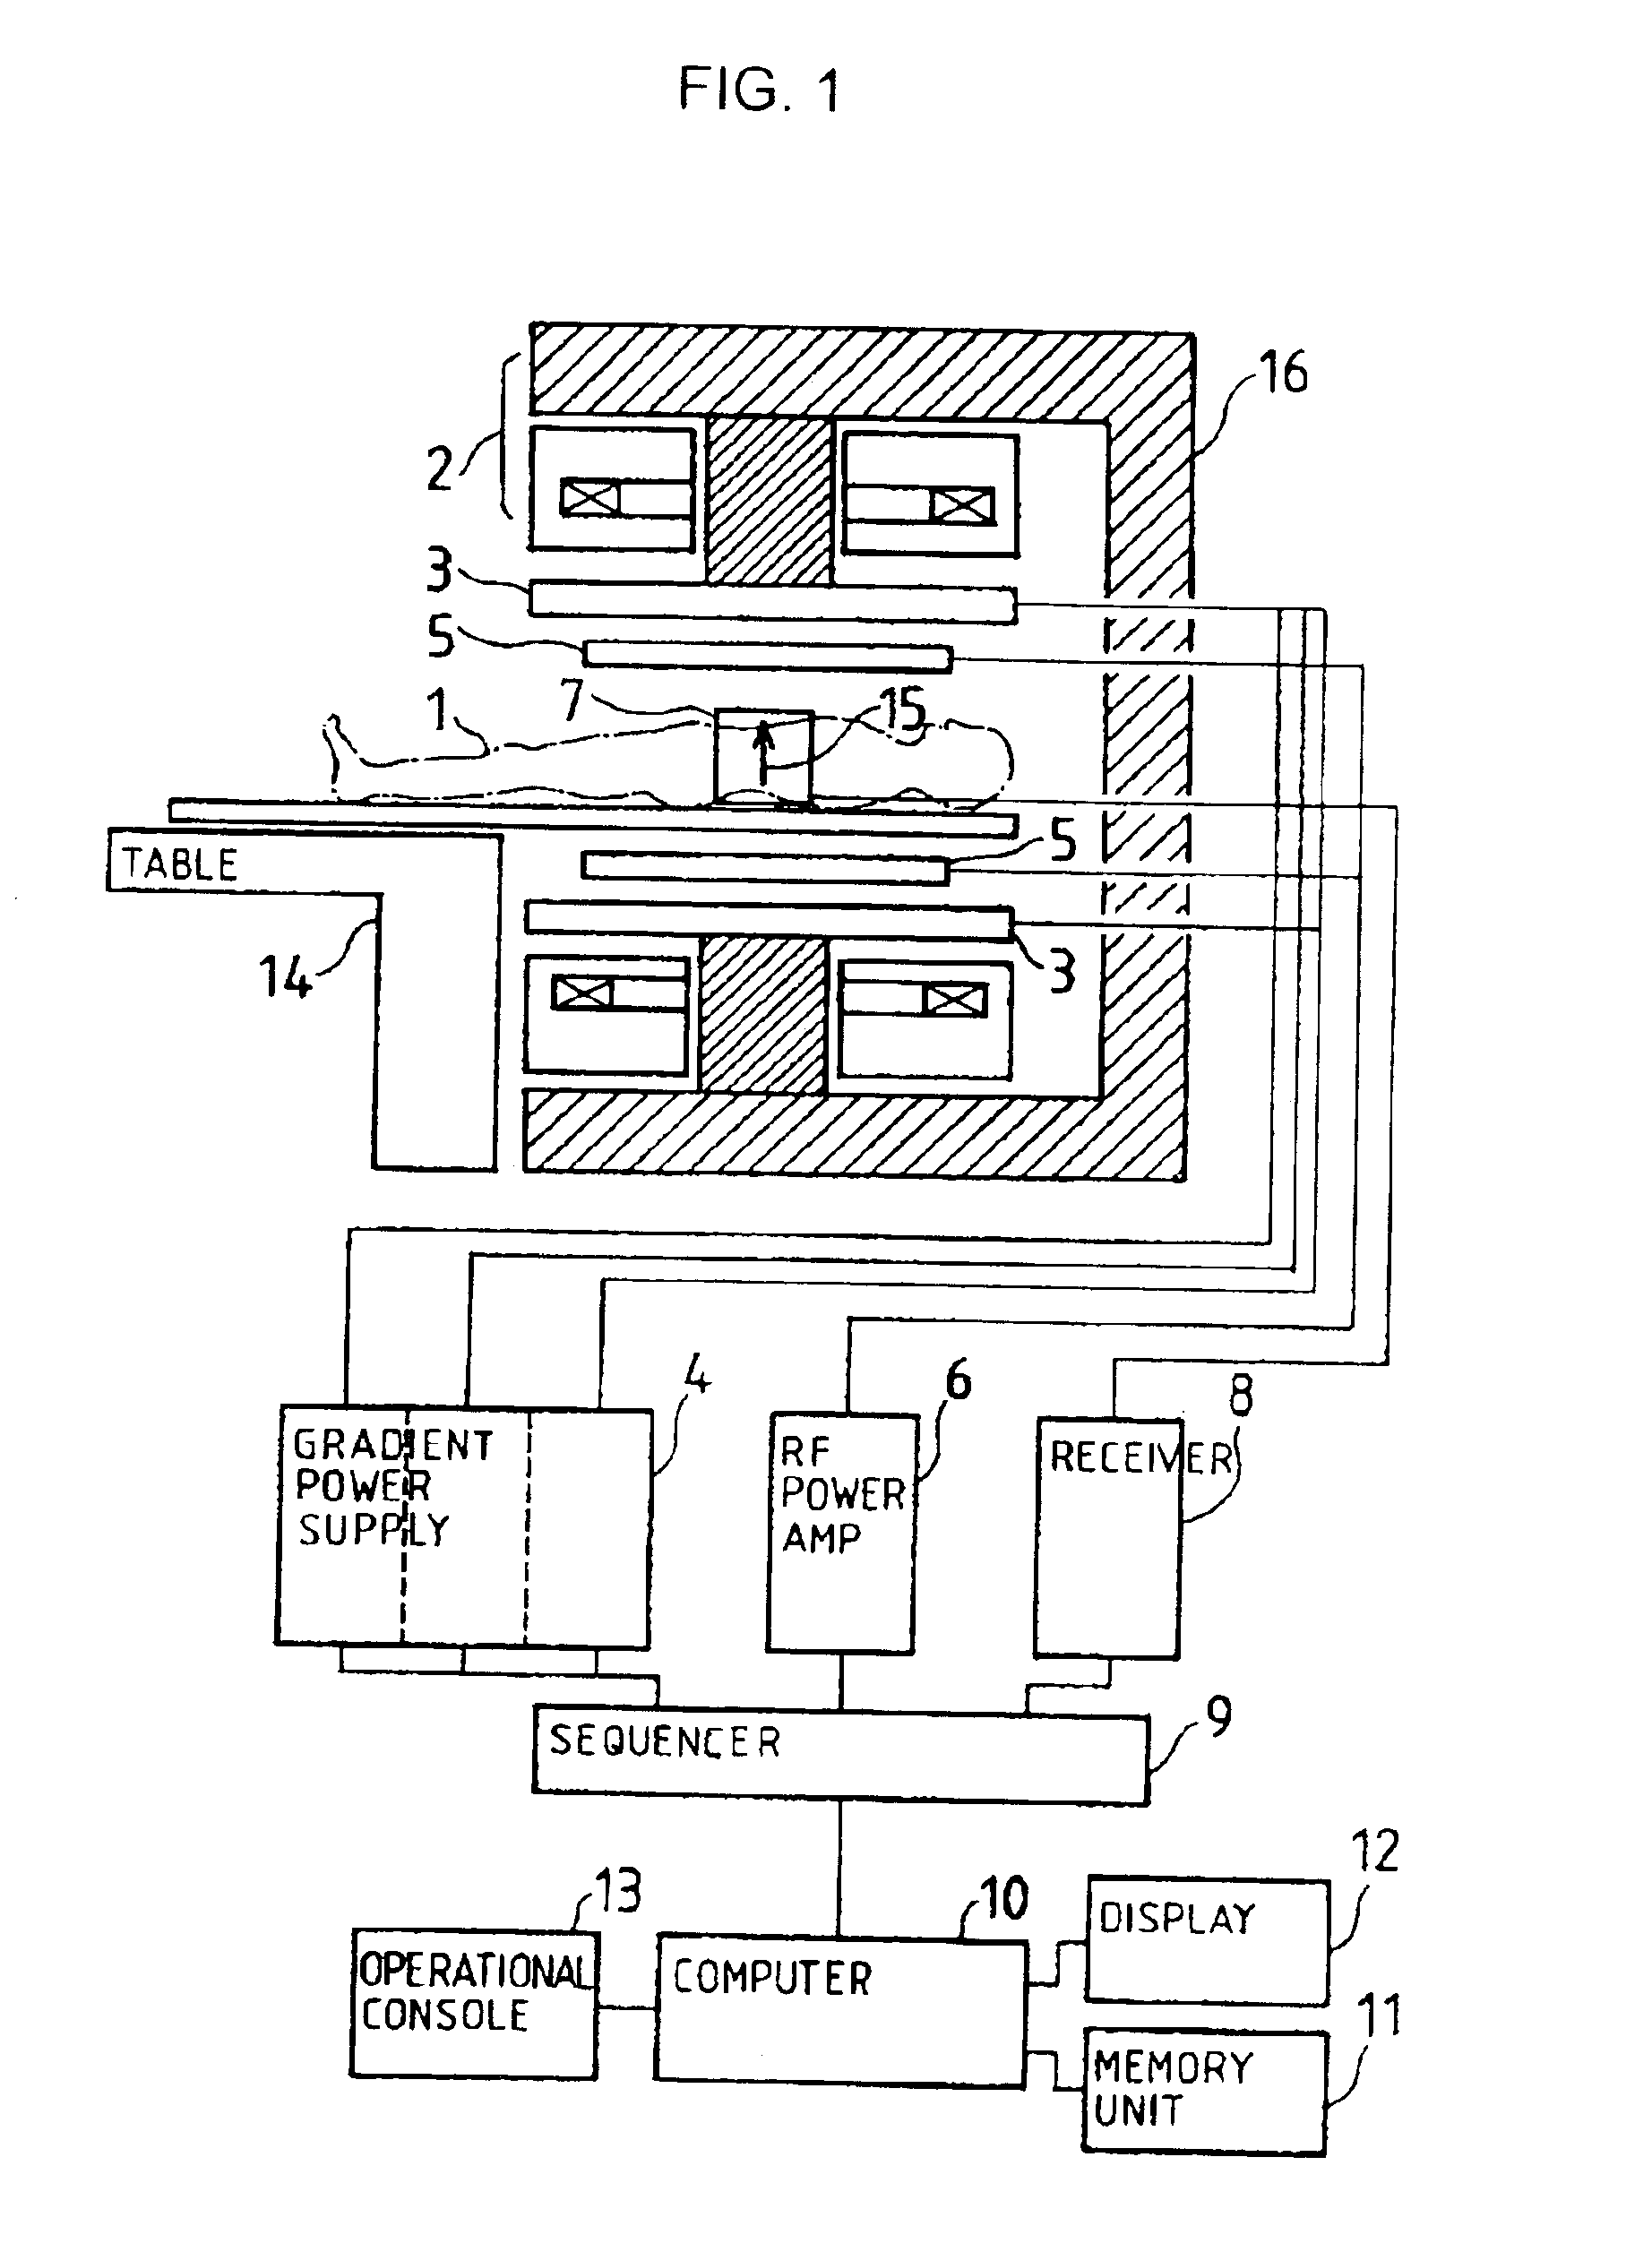 Magnetic resonance imaging device and gradient magnetic field coil used for it